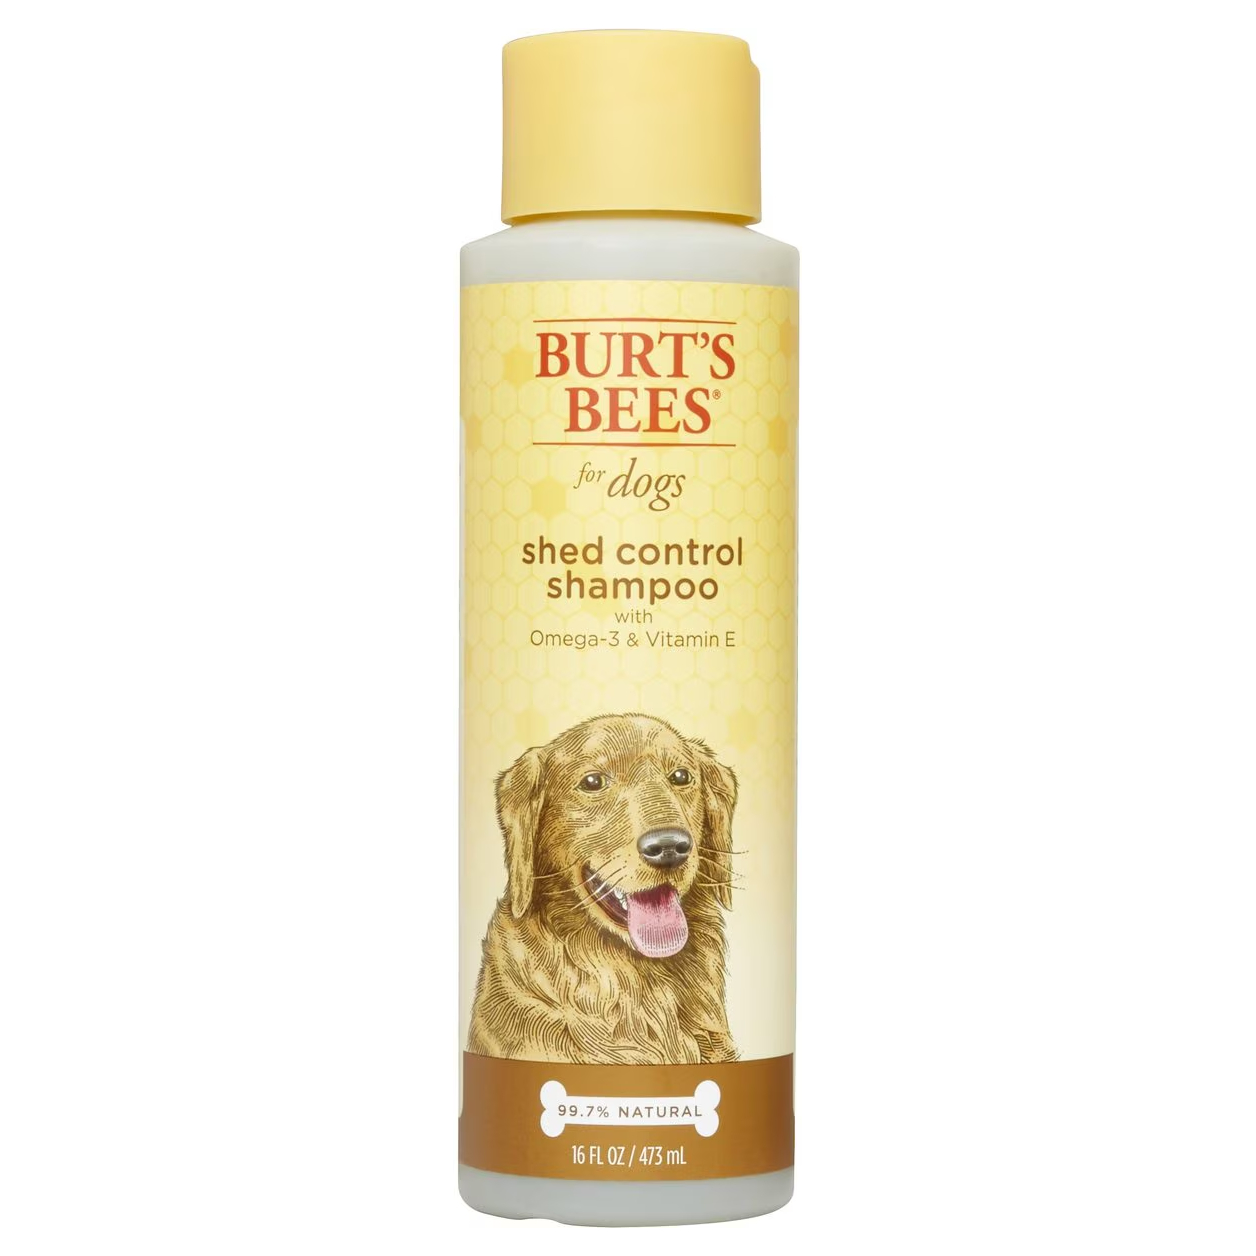 Burt's Bees for Dogs Shed Control Shampoo